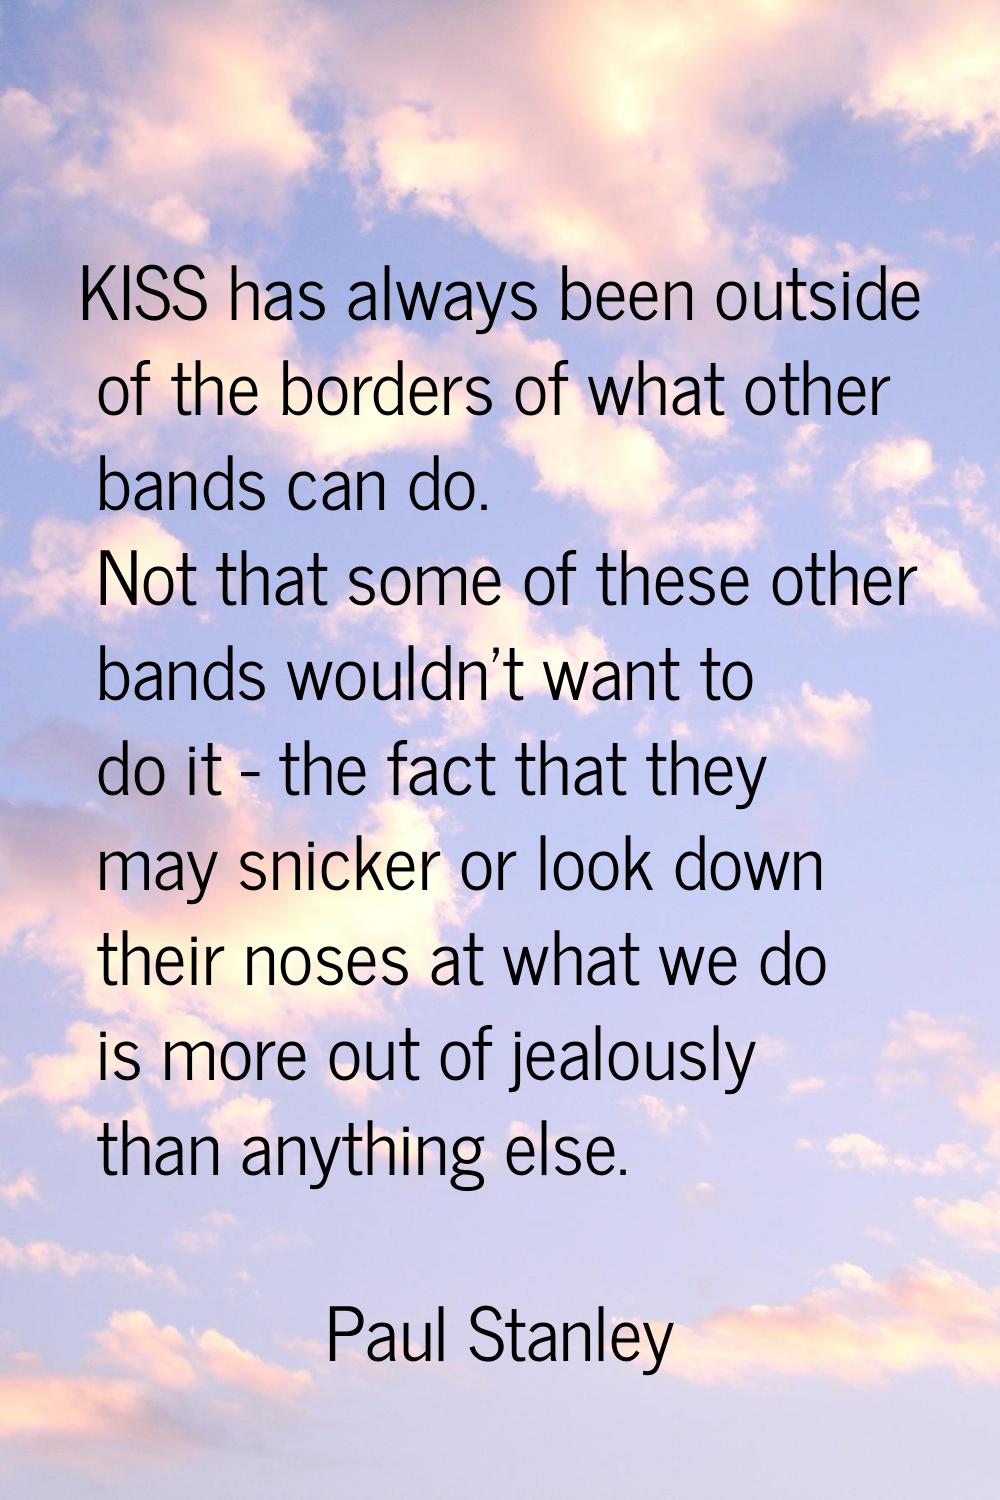 KISS has always been outside of the borders of what other bands can do. Not that some of these othe